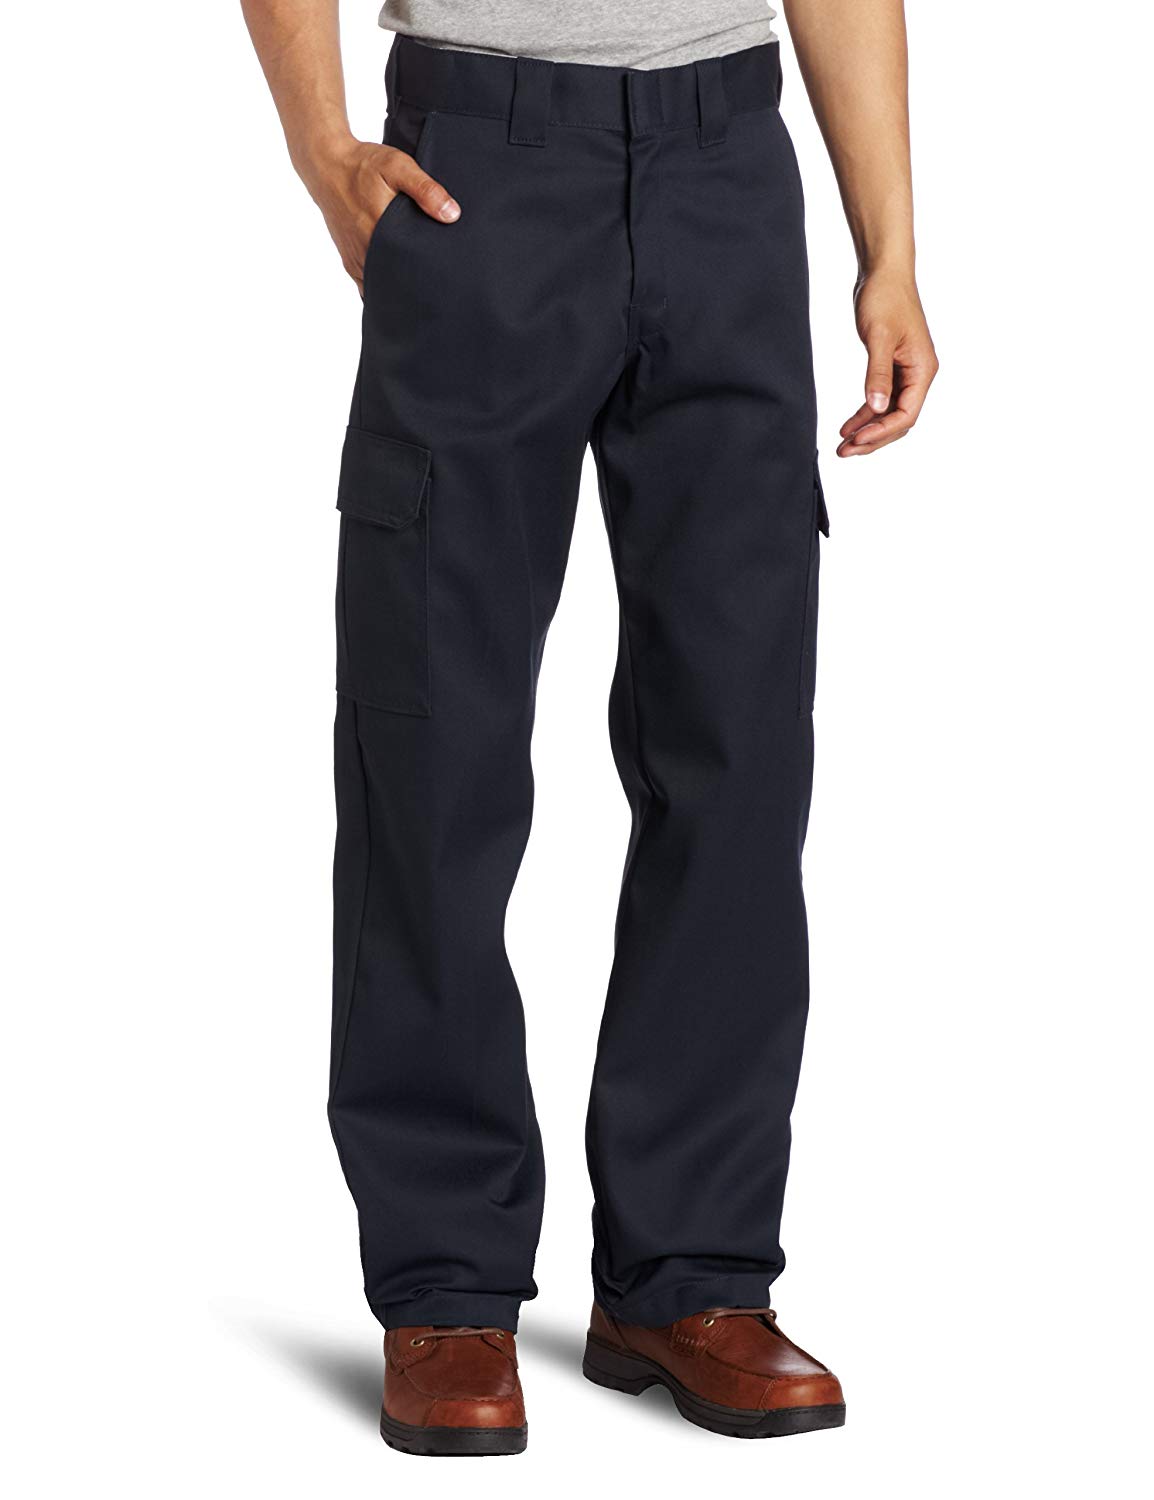 Dickies Men's Relaxed Straight Fit Cargo Work Pant,, Dark Navy, Size ...